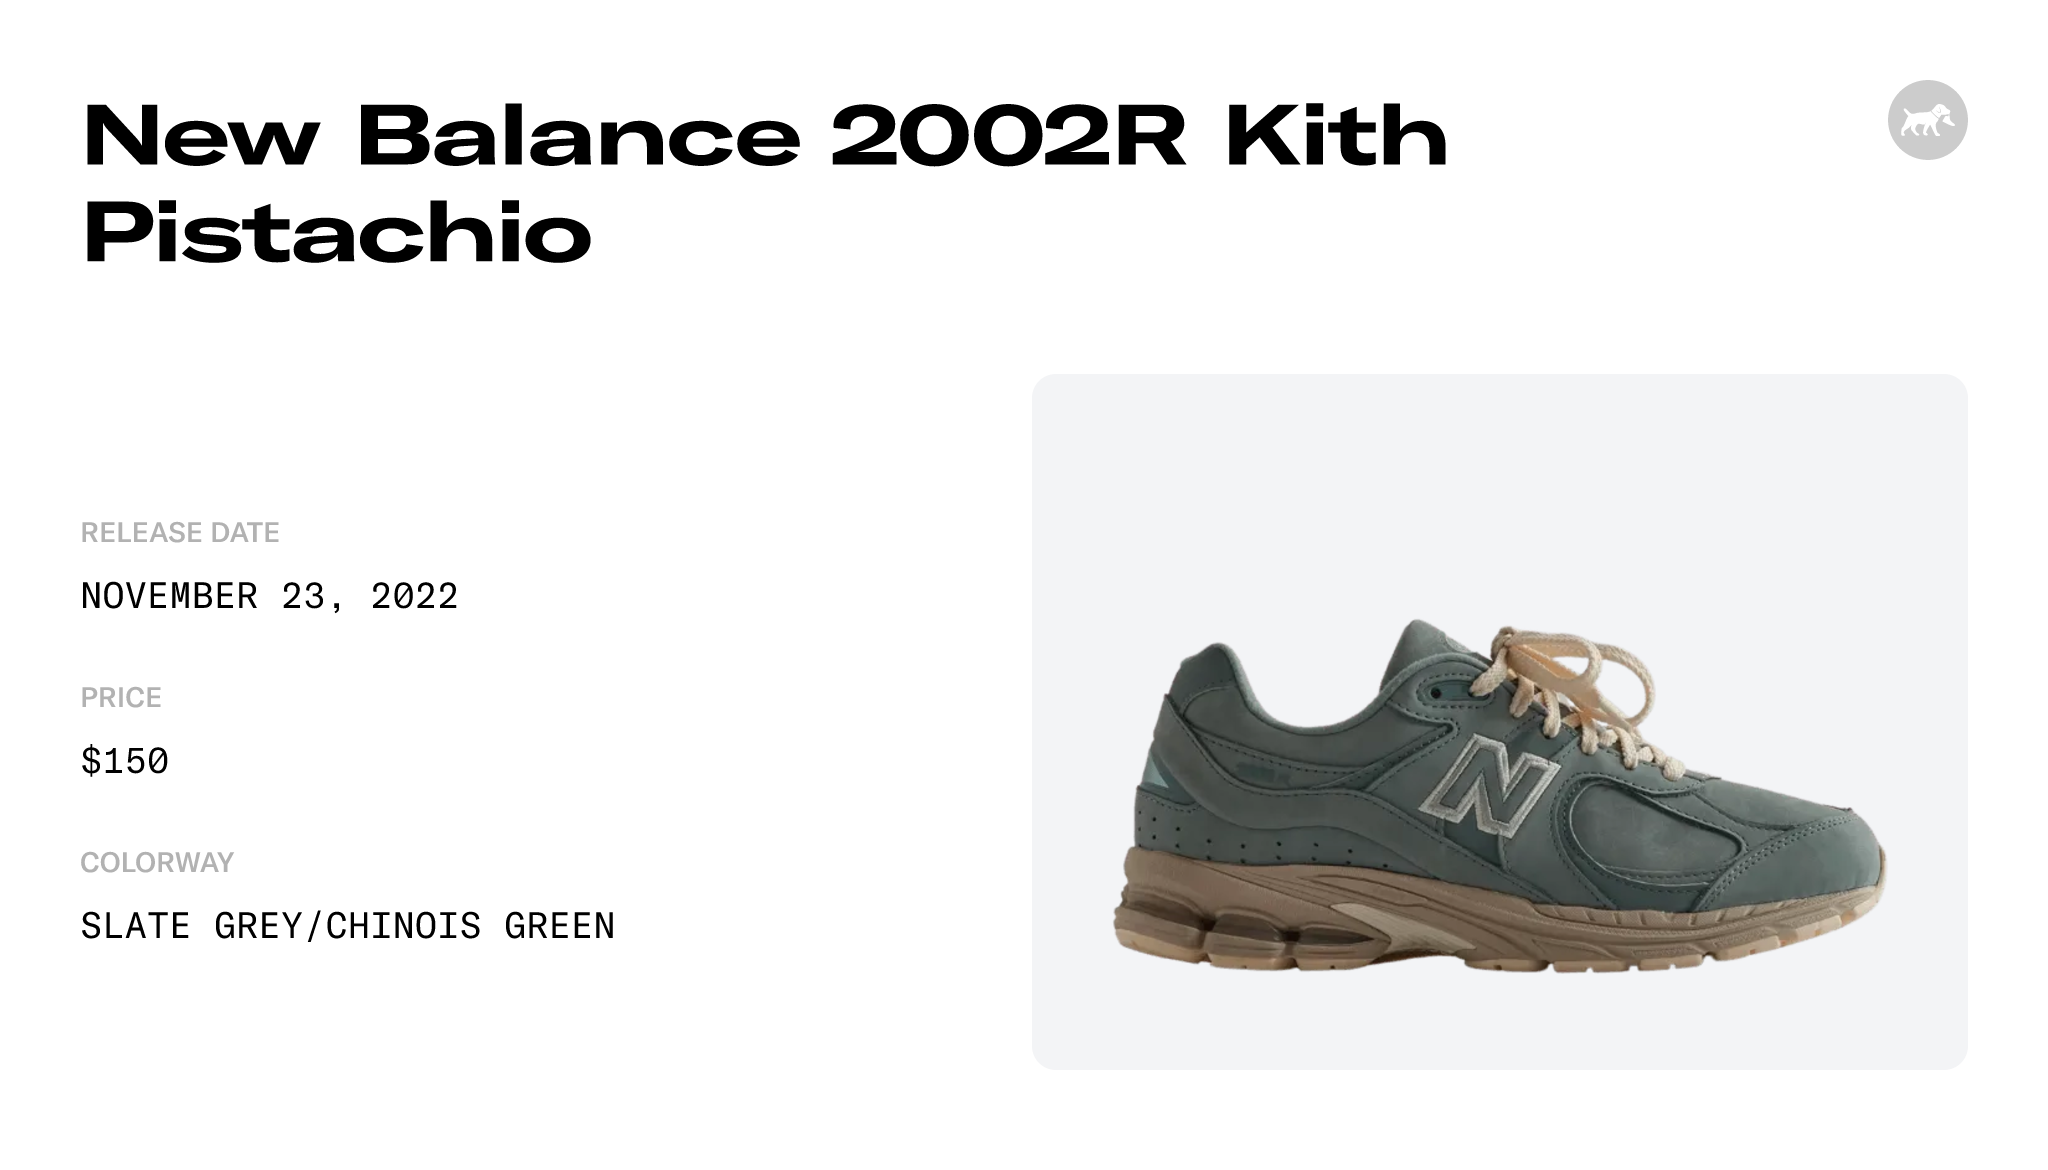 New Balance 2002R Kith Pistachio - M2002RK1 Raffles and Release Date